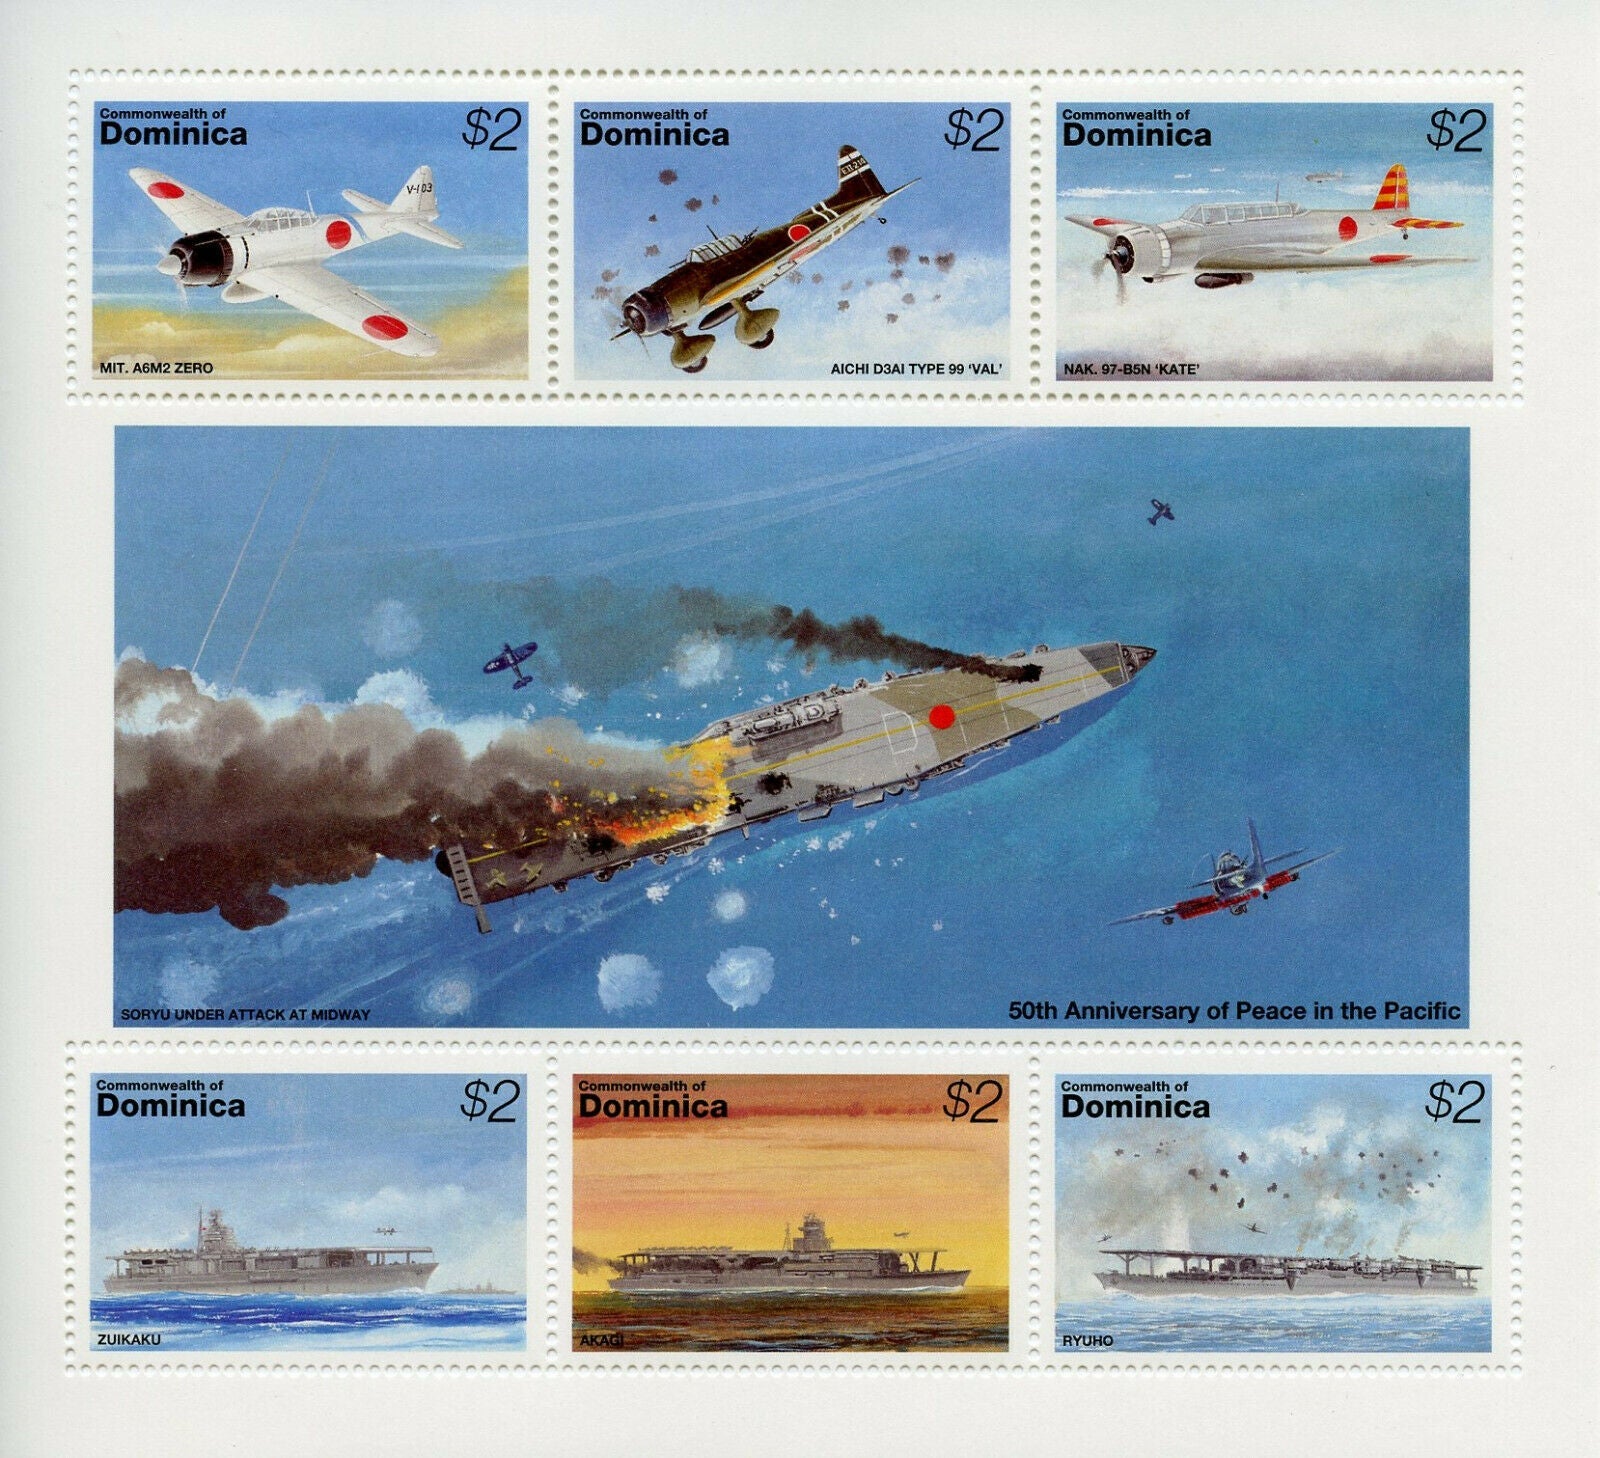 Dominica 1995 MNH Military Stamps WWII WW2 VJ Day Pacific Aviation Ships 6v M/S